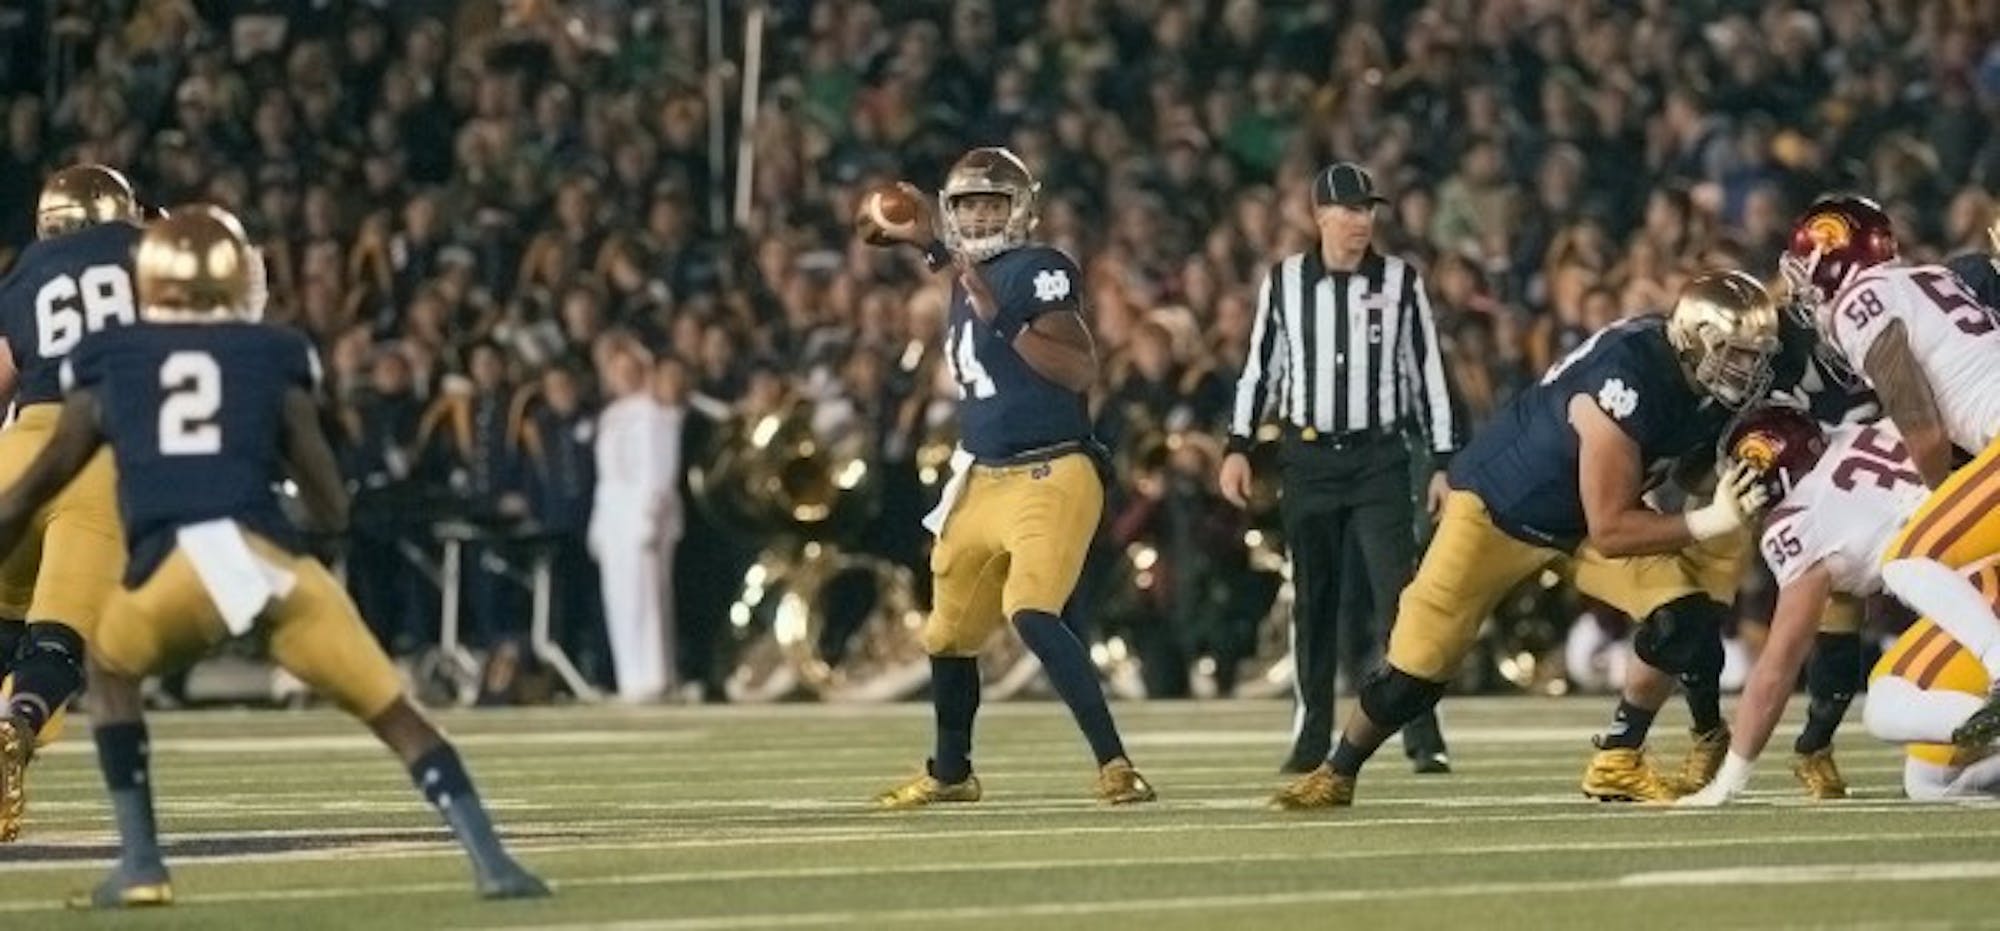 Irish sophomore quarterback DeShone Kizer looks to pass during Notre Dame’s 41-31 win over Southern California on Oct. 17.